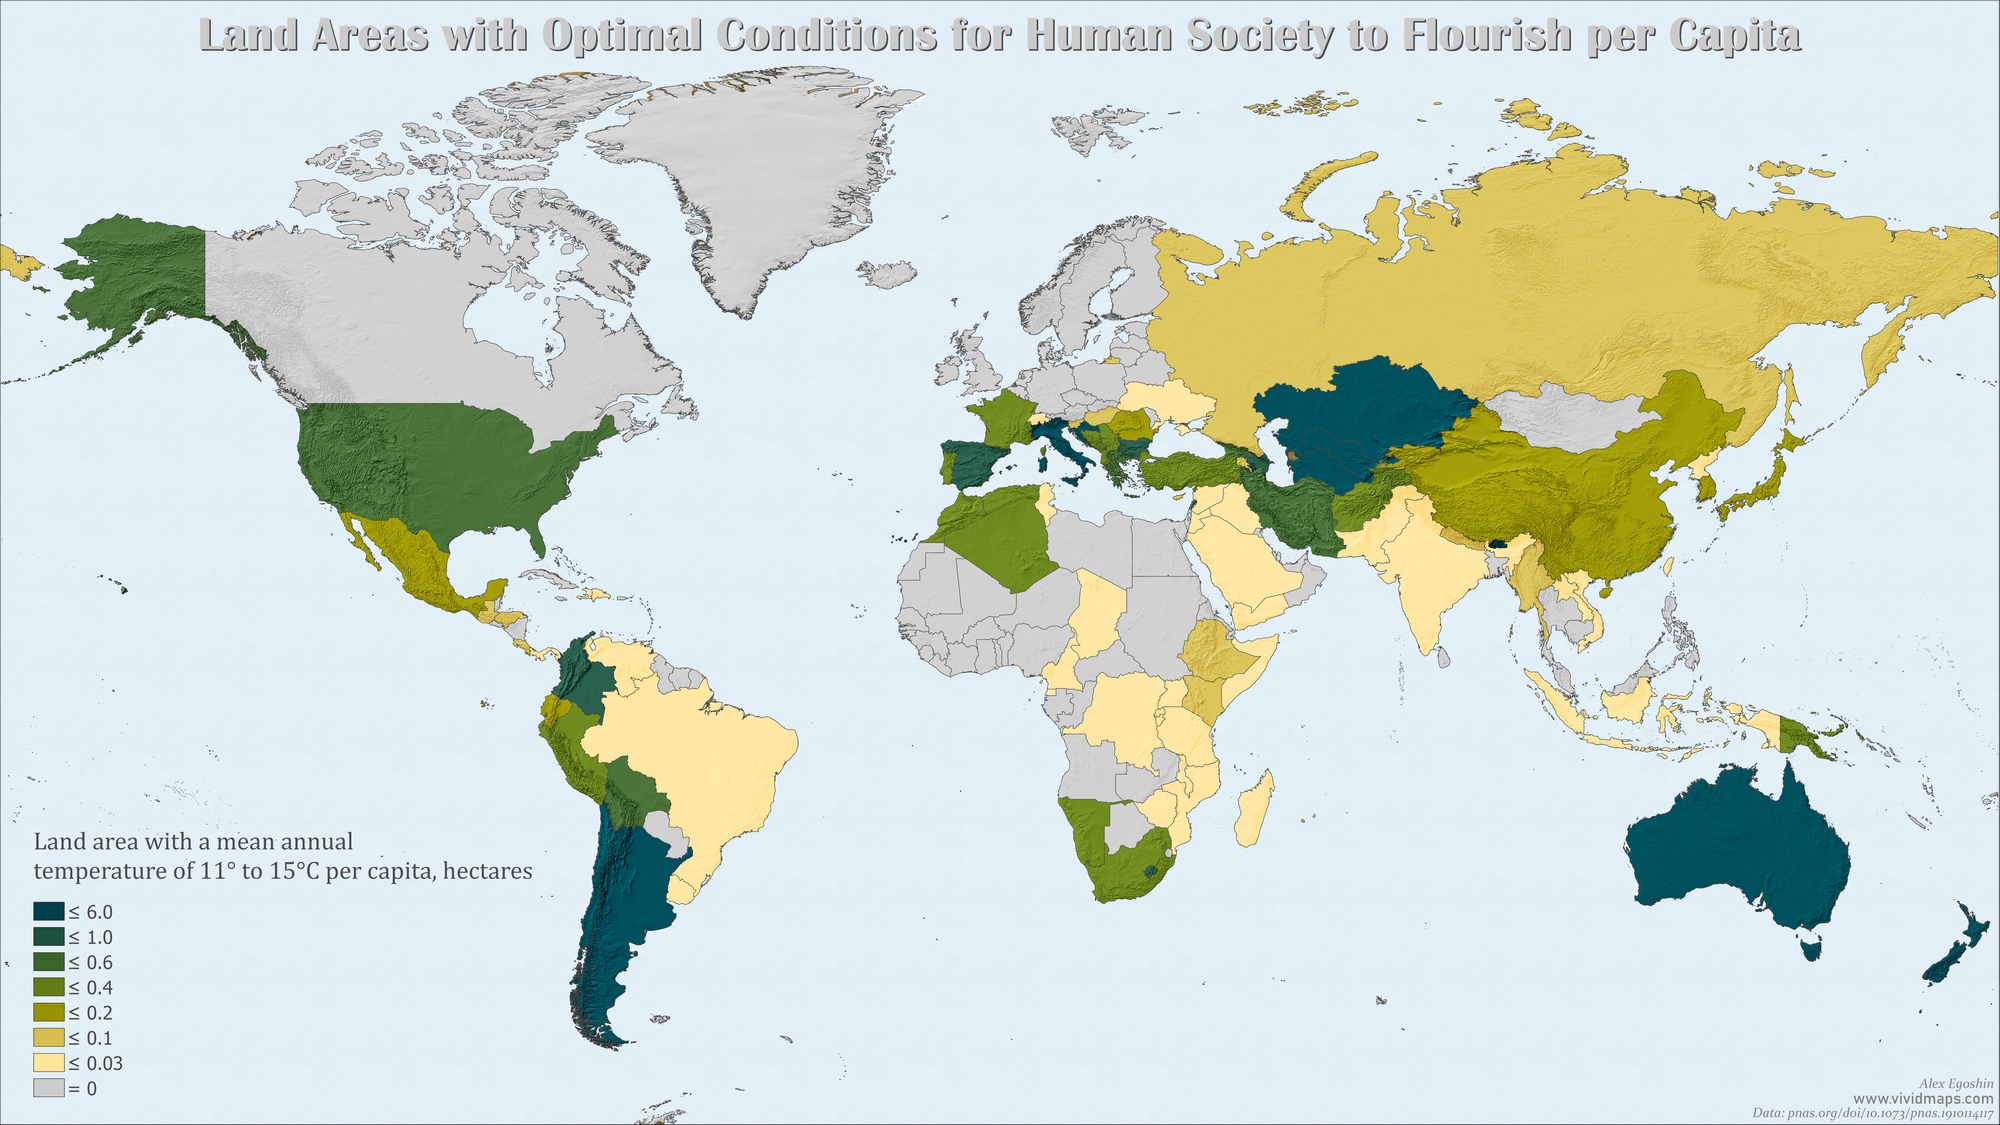 Land area with optimal conditions for human society to flourish per capita